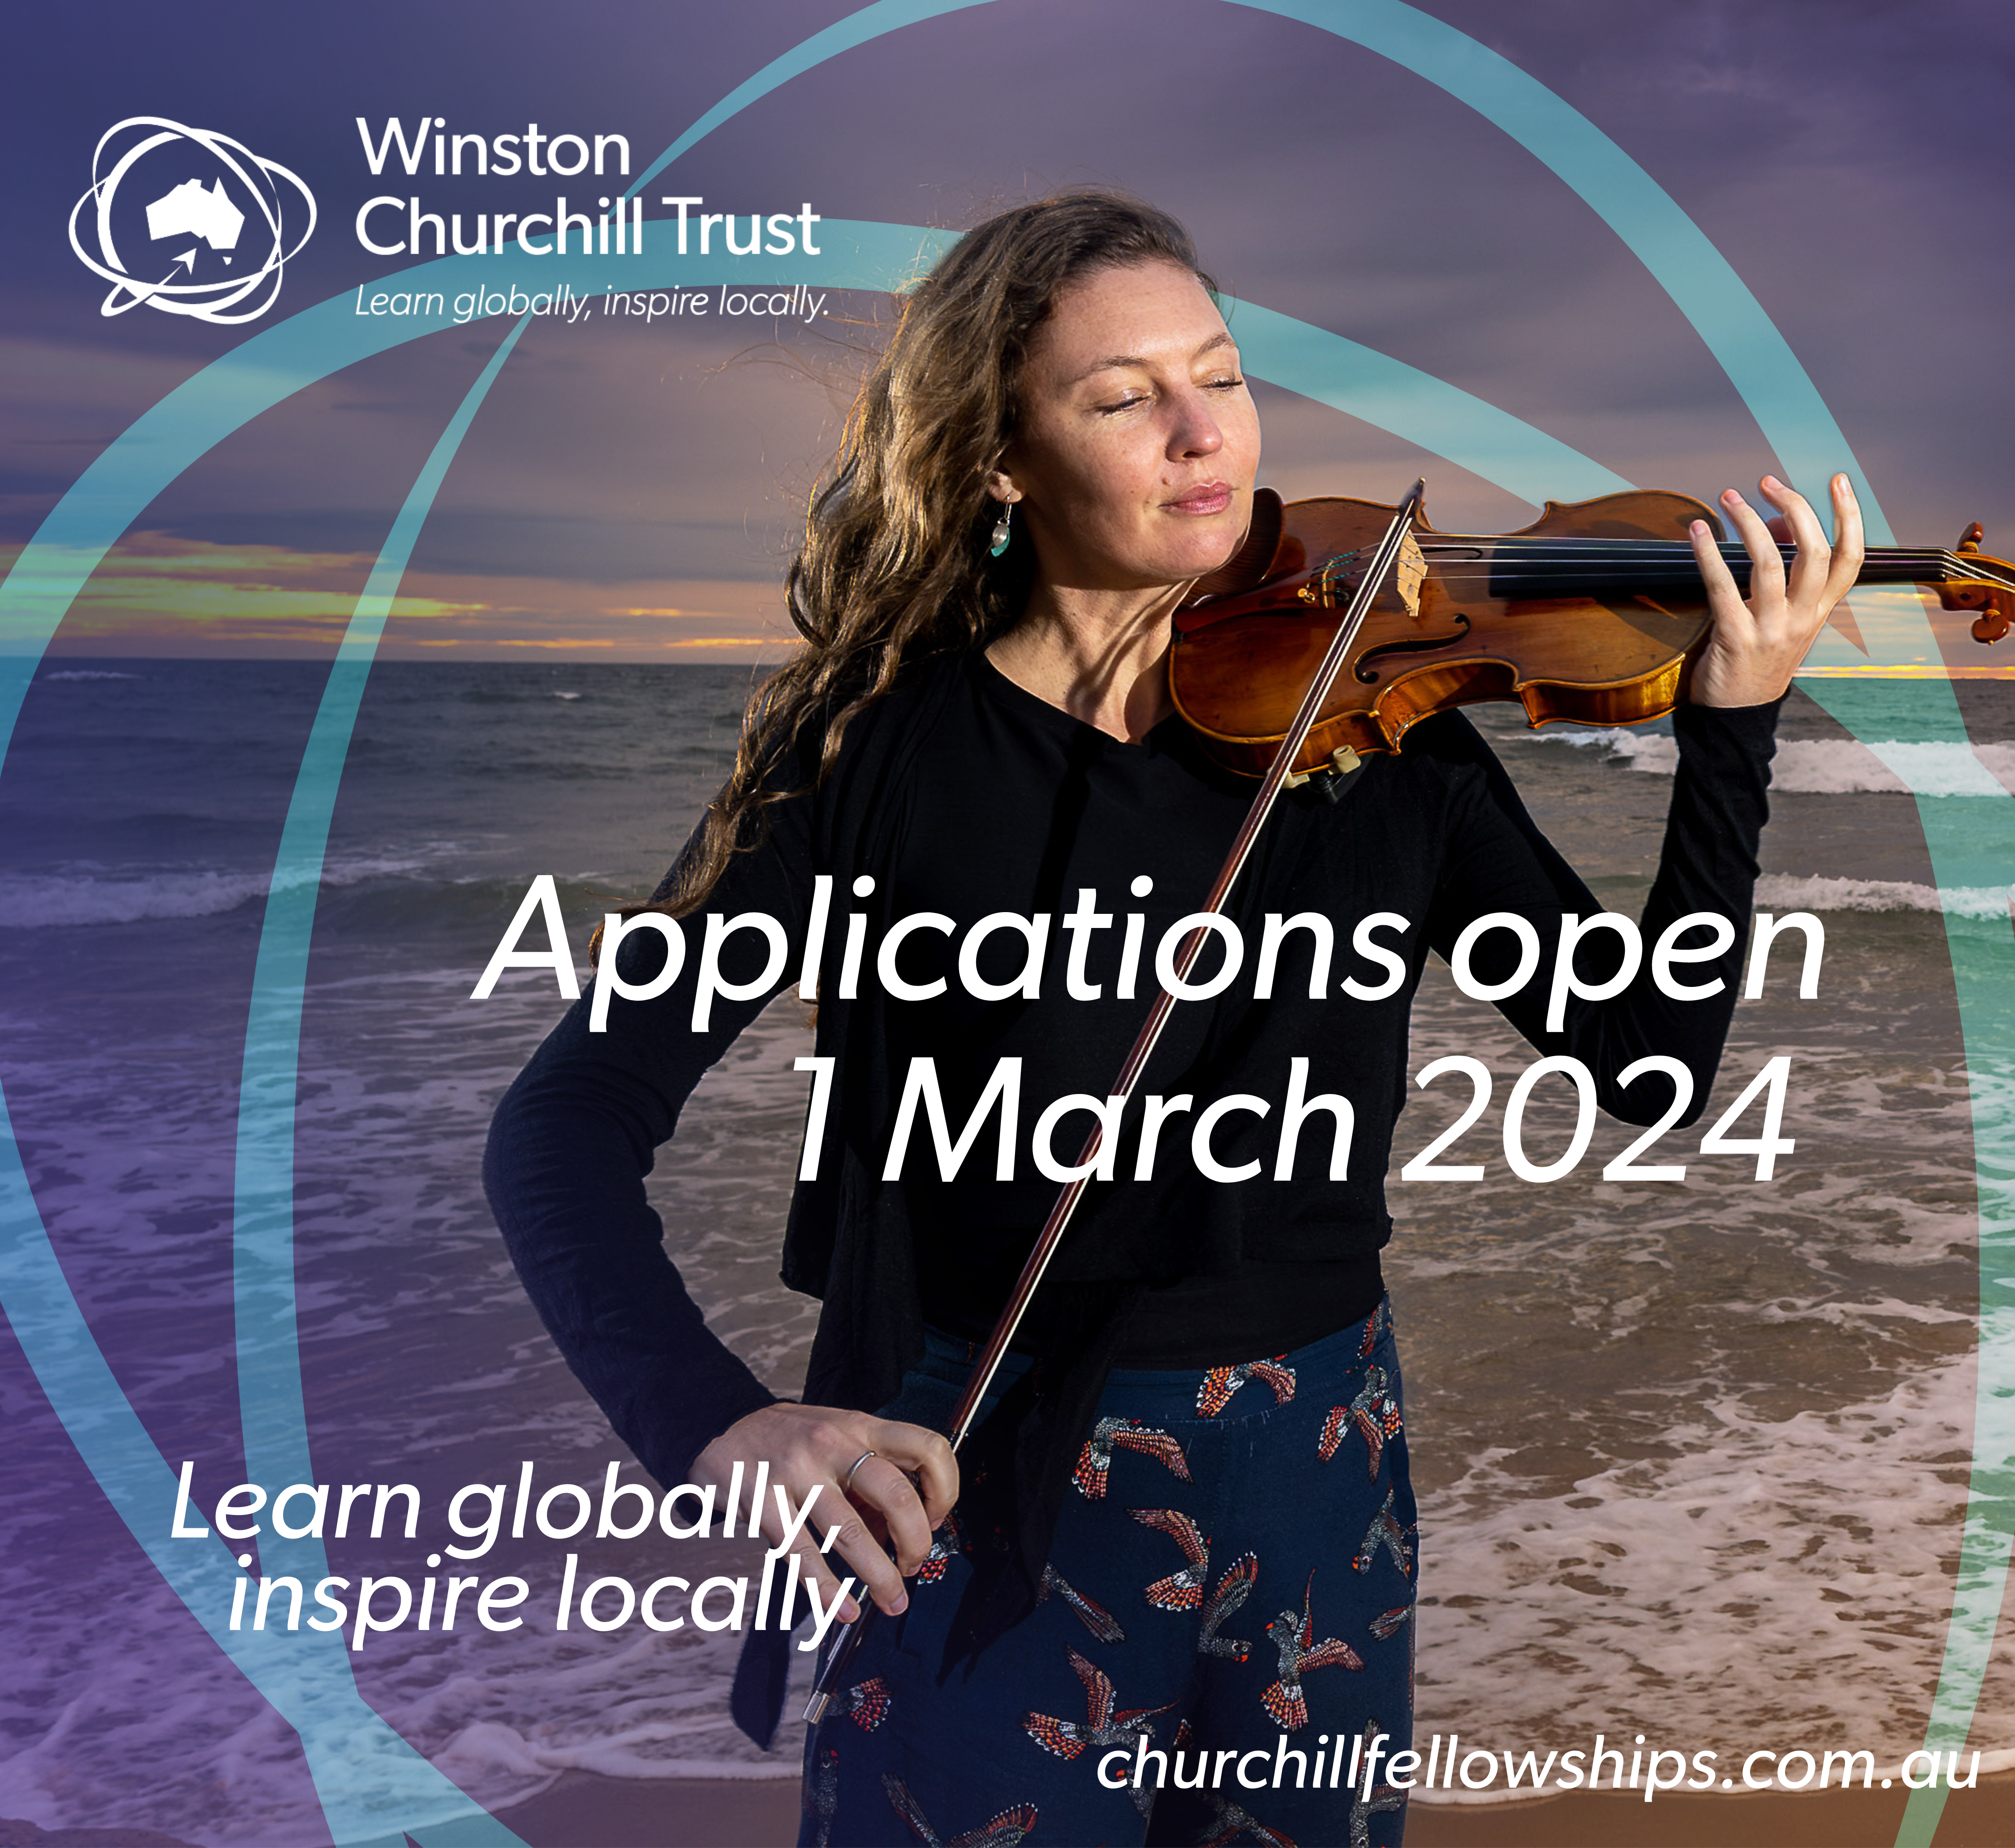 Applications open 1 March